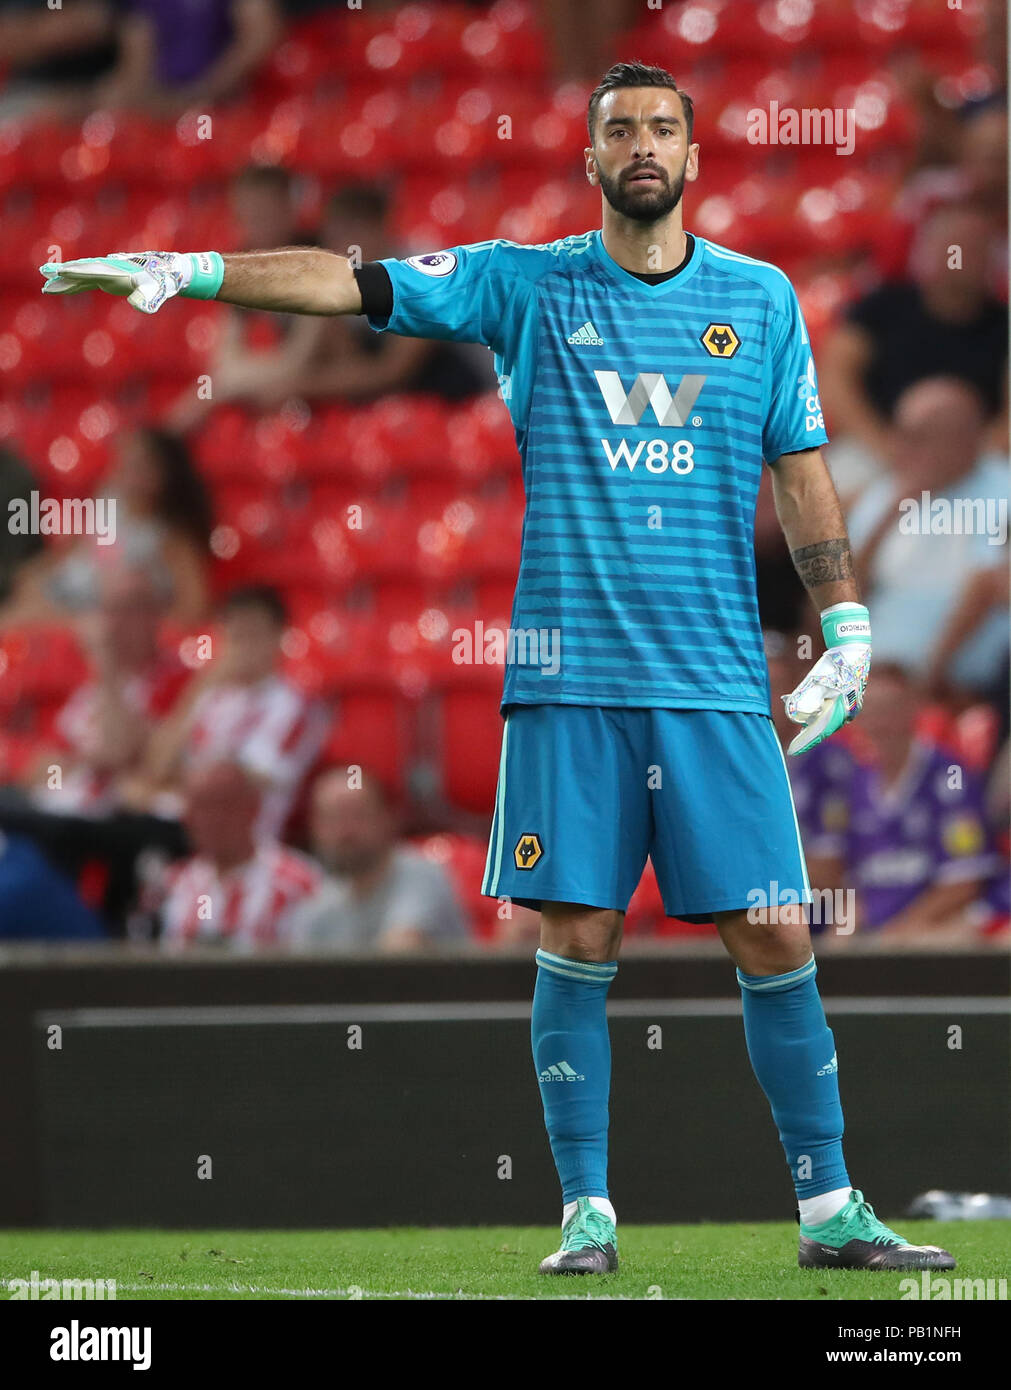 Wolverhampton Wanderers' goalkeeper Rui Patricio gestures during a pre season friendly match at The Bet365 Stadium, Stoke. PRESS ASSOCIATION Photo. Picture date: Wednesday July 25, 2018. Photo credit should read: Nick Potts/PA Wire. No use with unauthorised audio, video, data, fixture lists, club/league logos or 'live' services. Online in-match use limited to 75 images, no video emulation. No use in betting, games or single club/league/player publications. Stock Photo